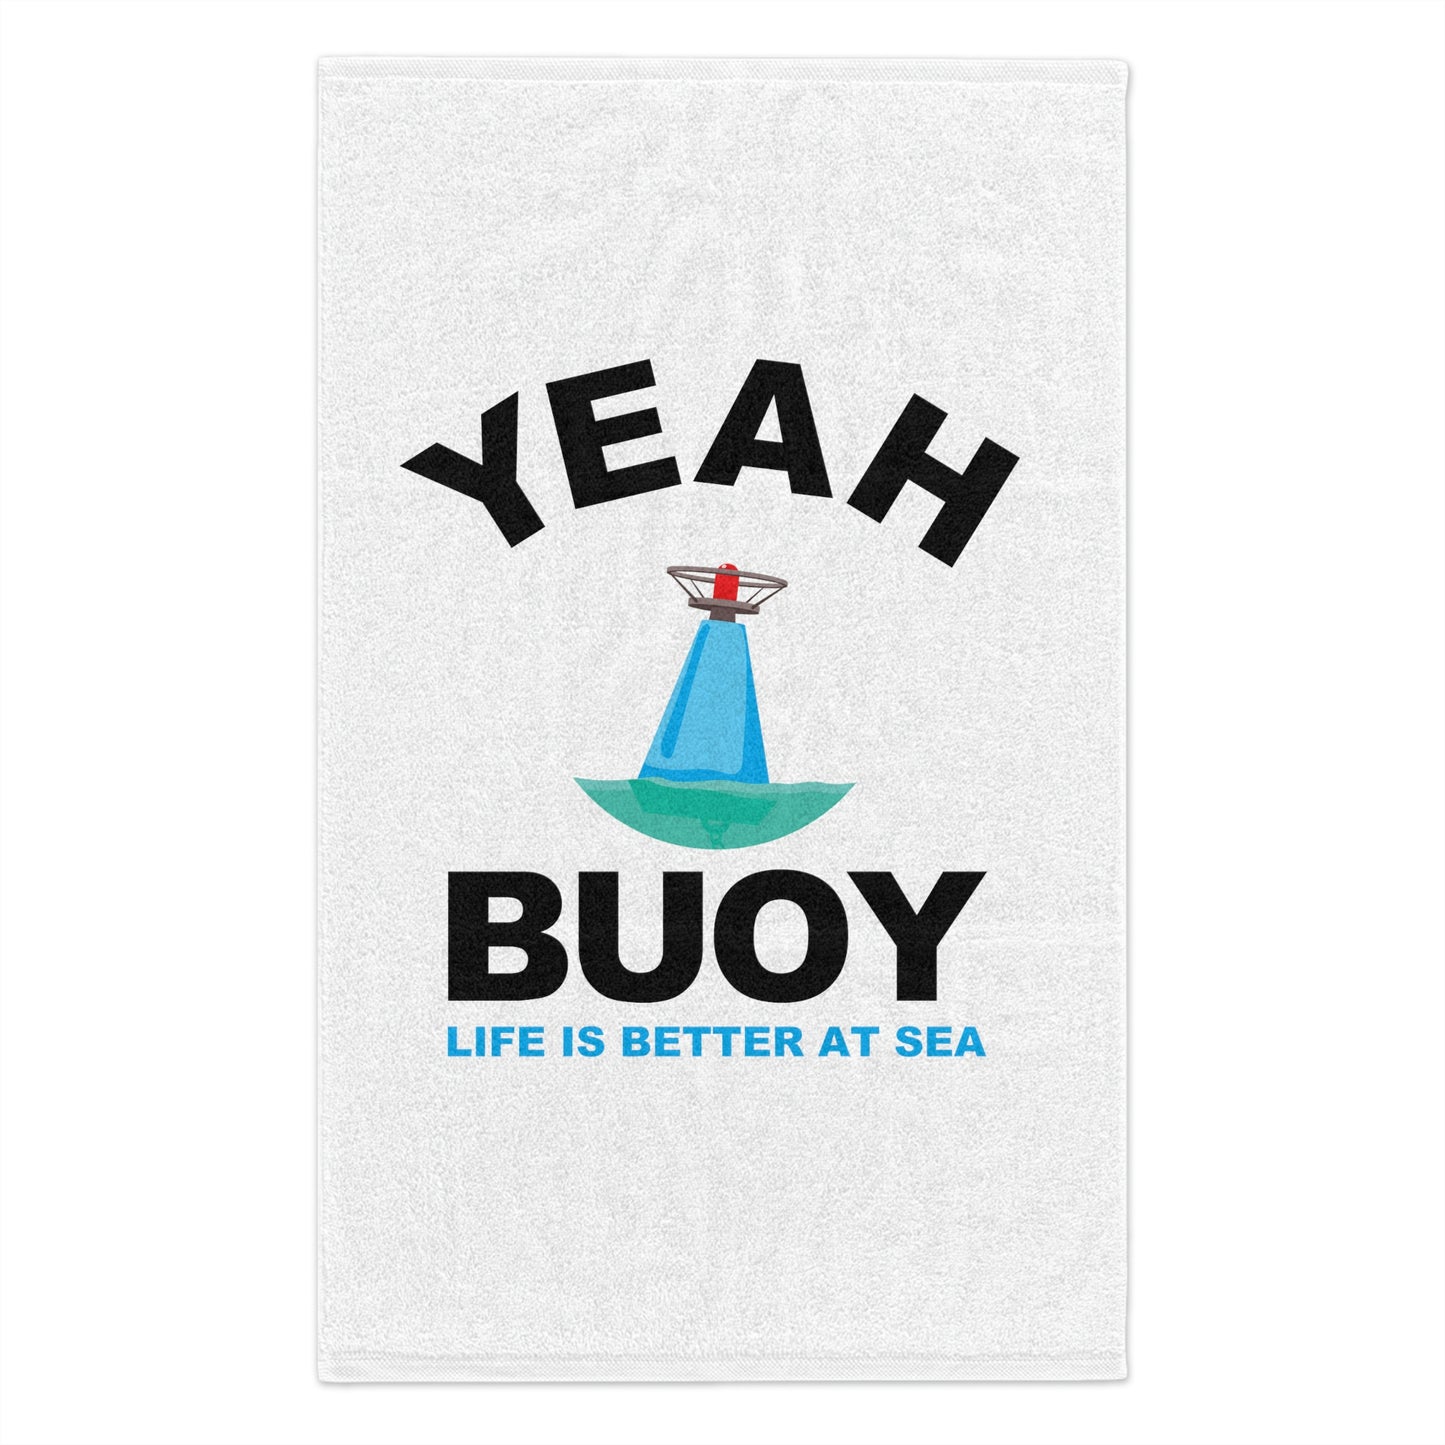 Yeah Buoy Life Is Better At Sea–Rally Towel, 11x18